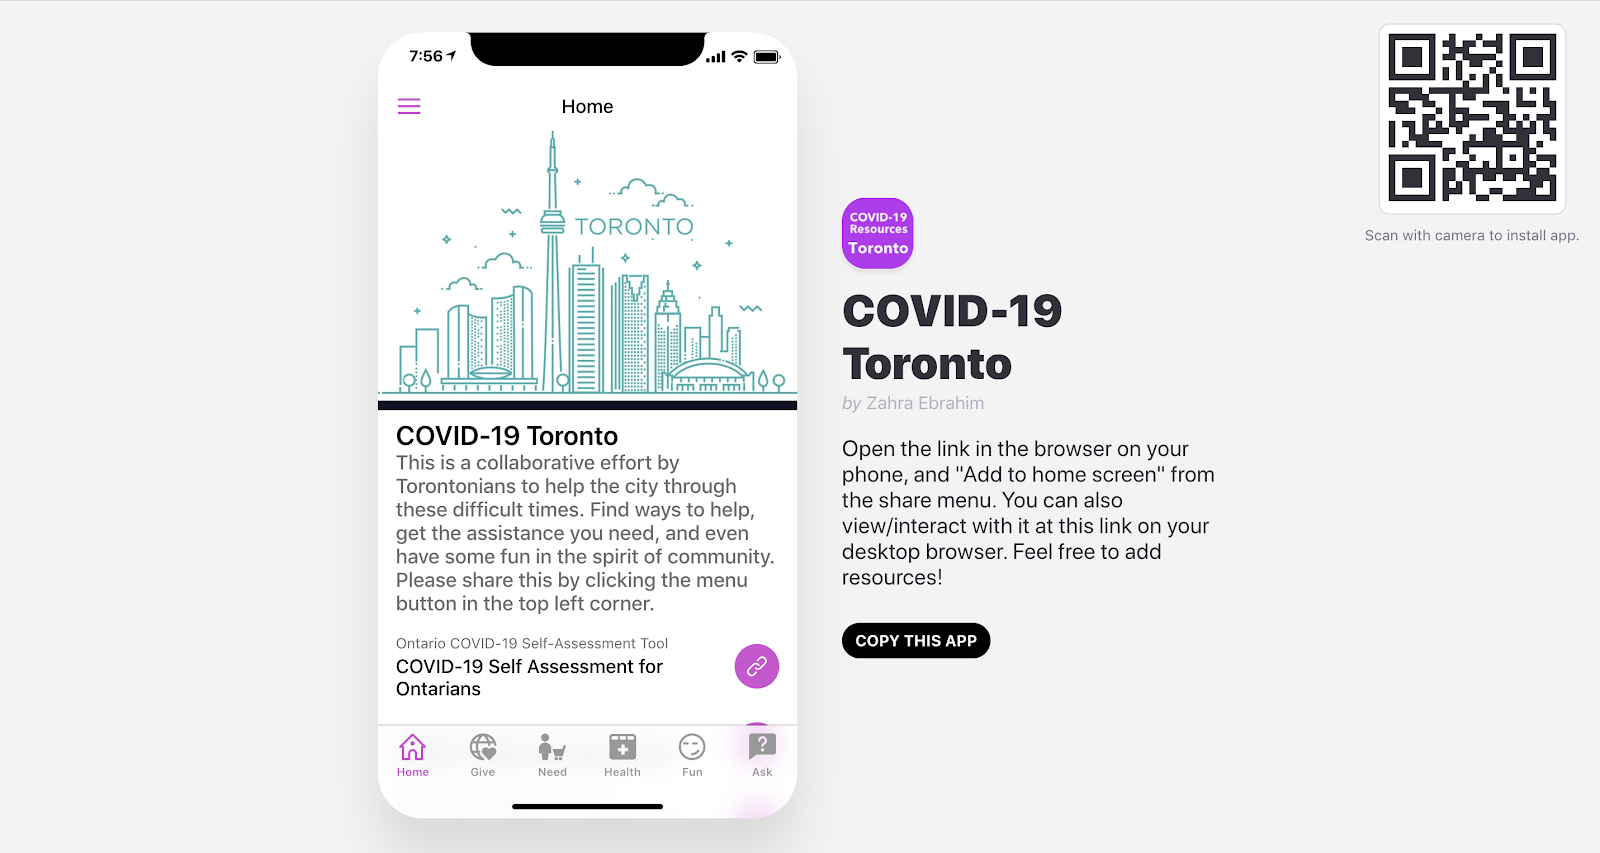 The Covid-19 Toronto app, designed by Zahra Ebrahim curates resources and information for Torontonians relevant to the pandemic.